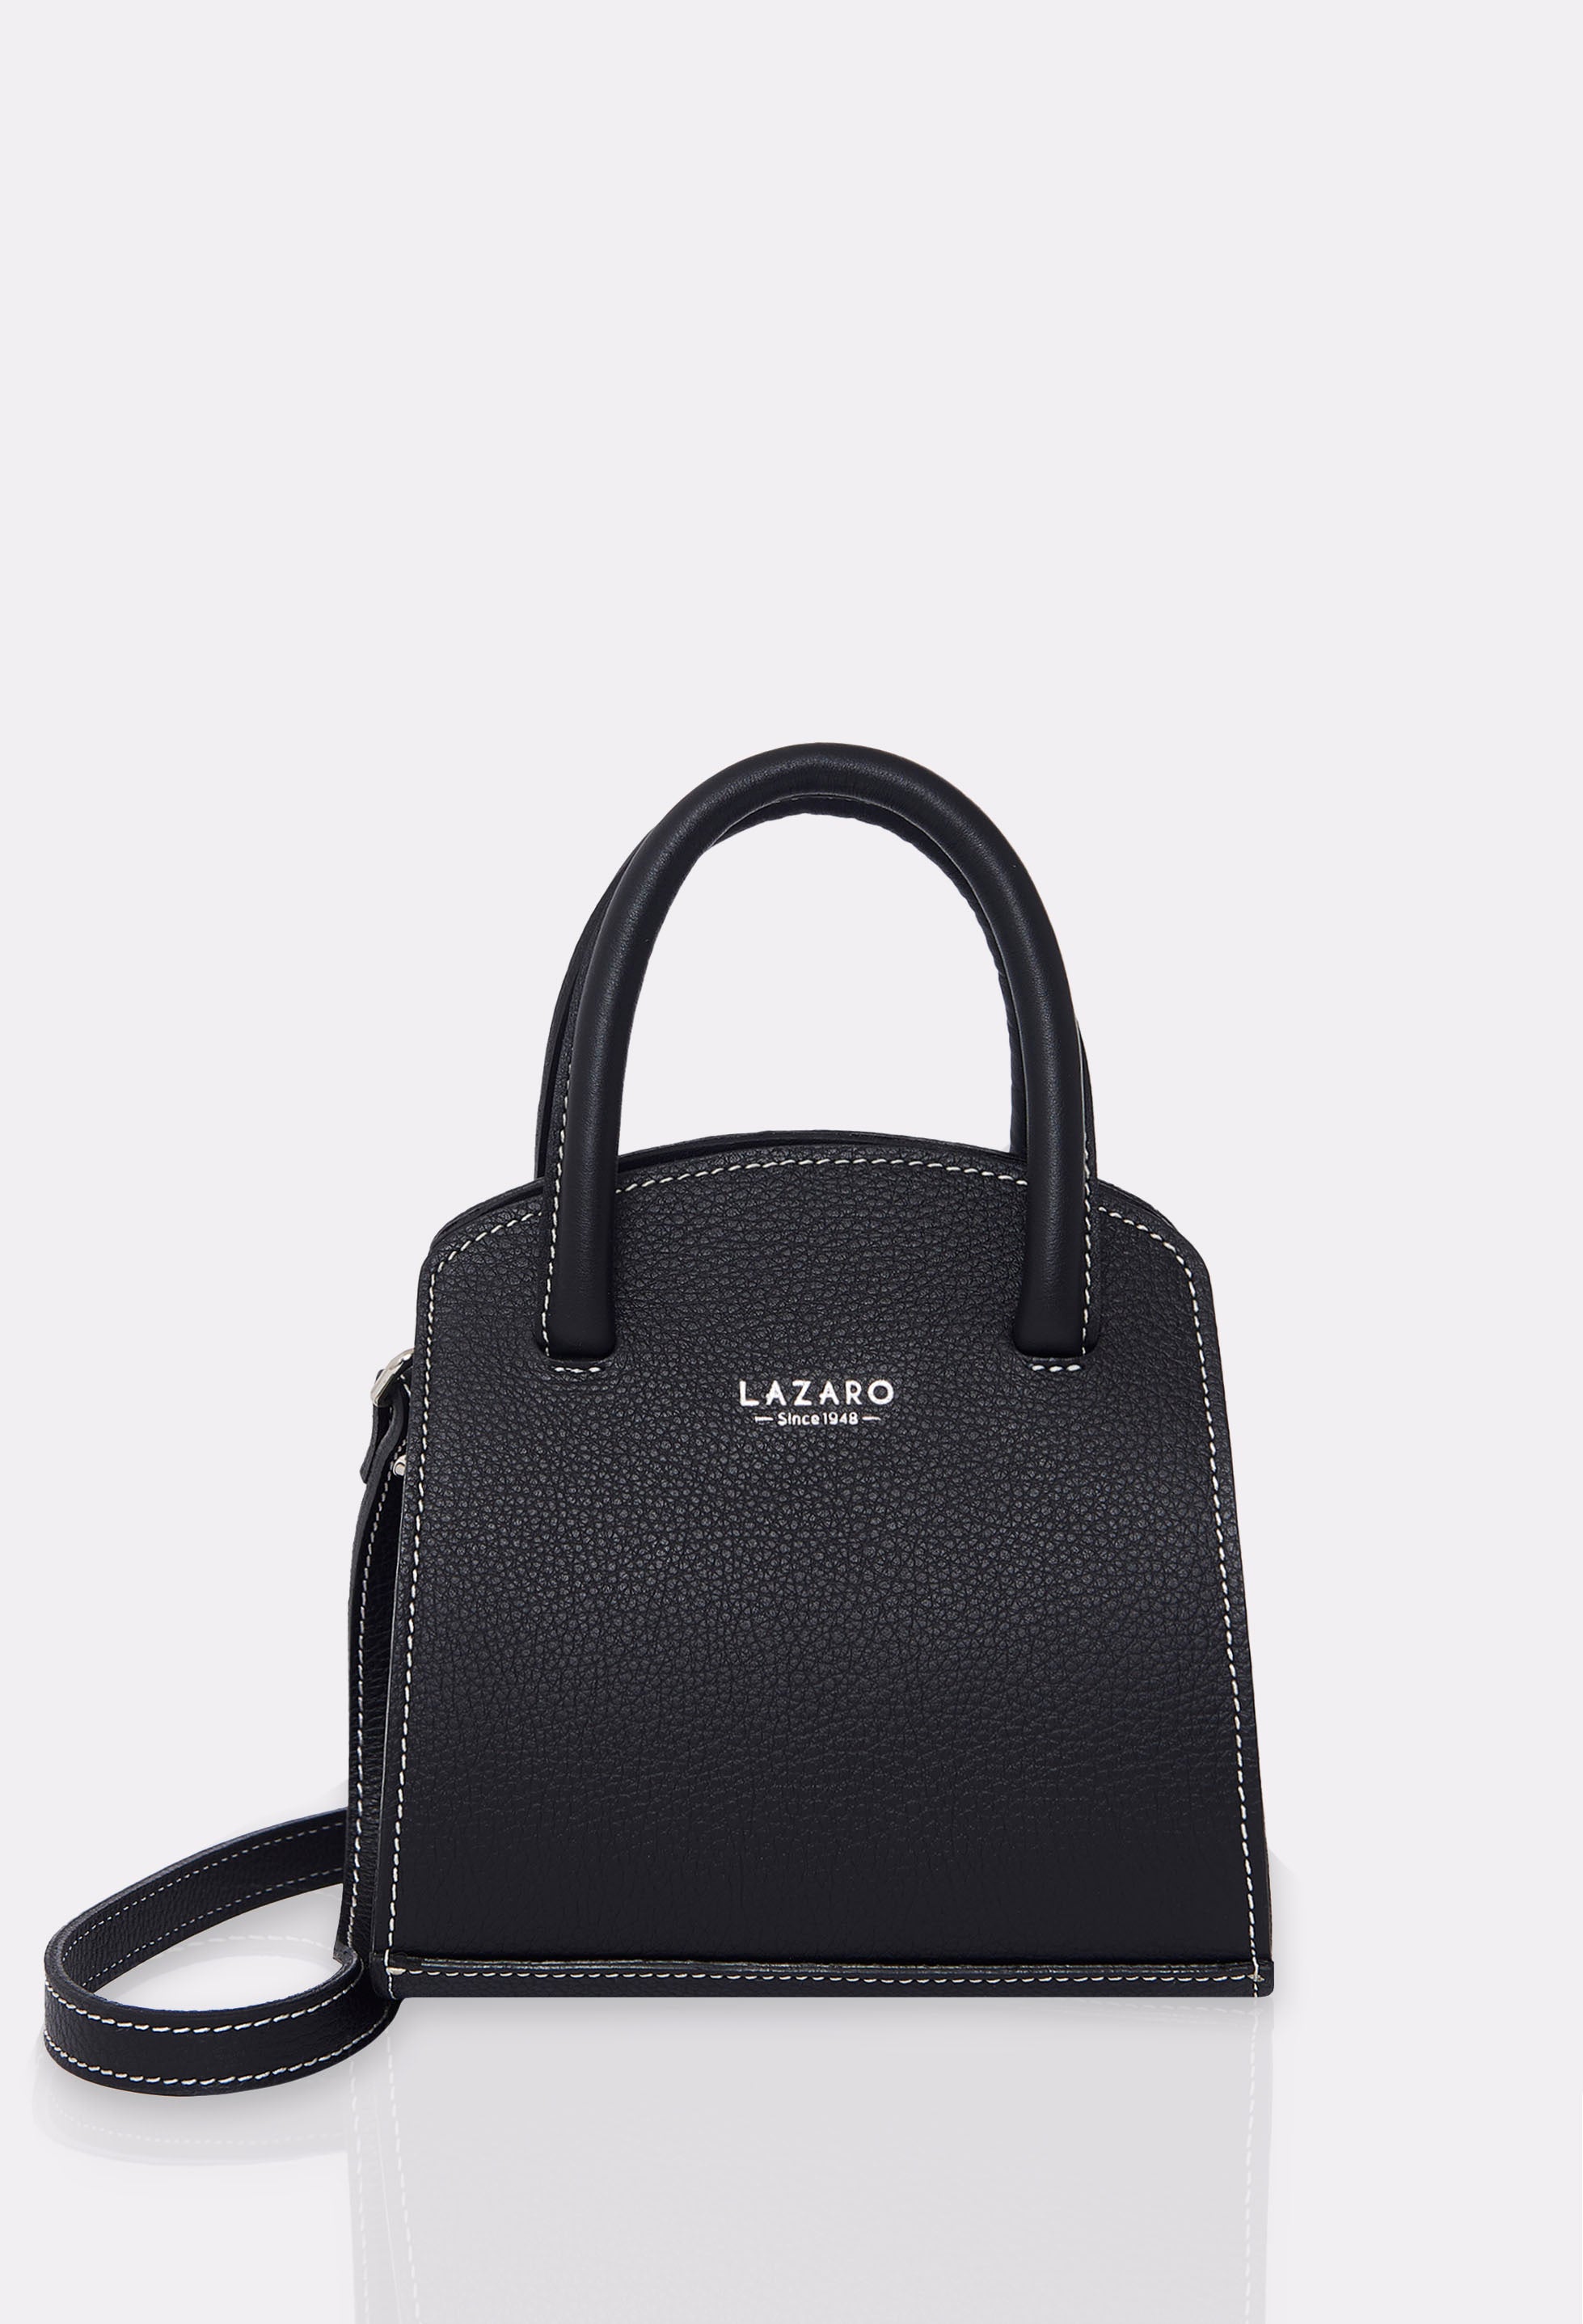 Front of a Black Leather Mini Bag Margot with a leather adjustable and detachable strap, silver embossed Lazaro logo and contrast stitching highlights.